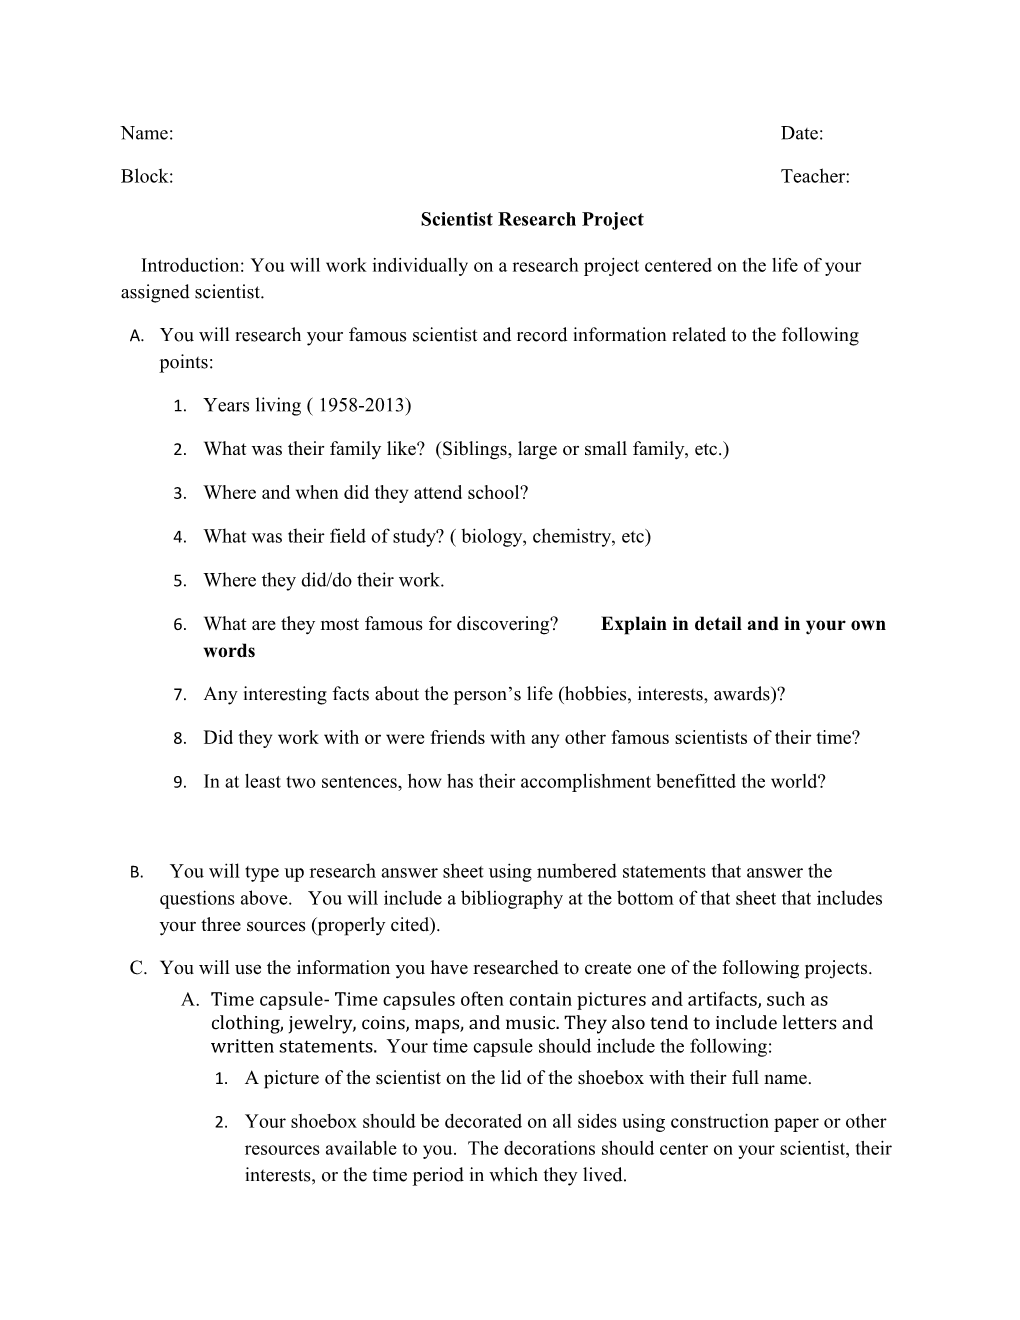 Scientist Research Project